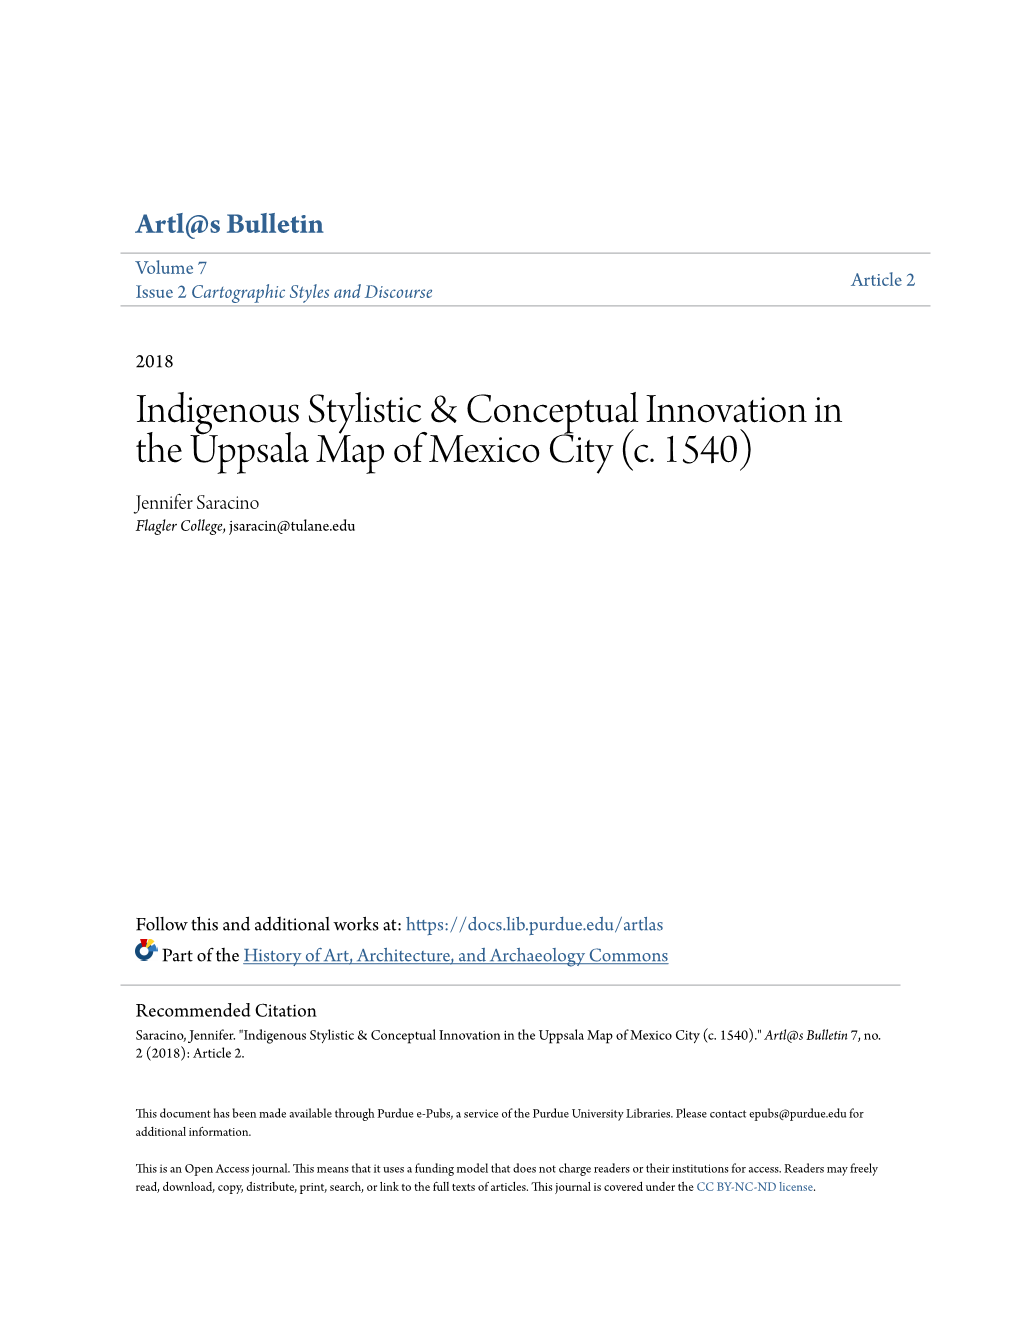 Indigenous Stylistic & Conceptual Innovation in the Uppsala Map Of